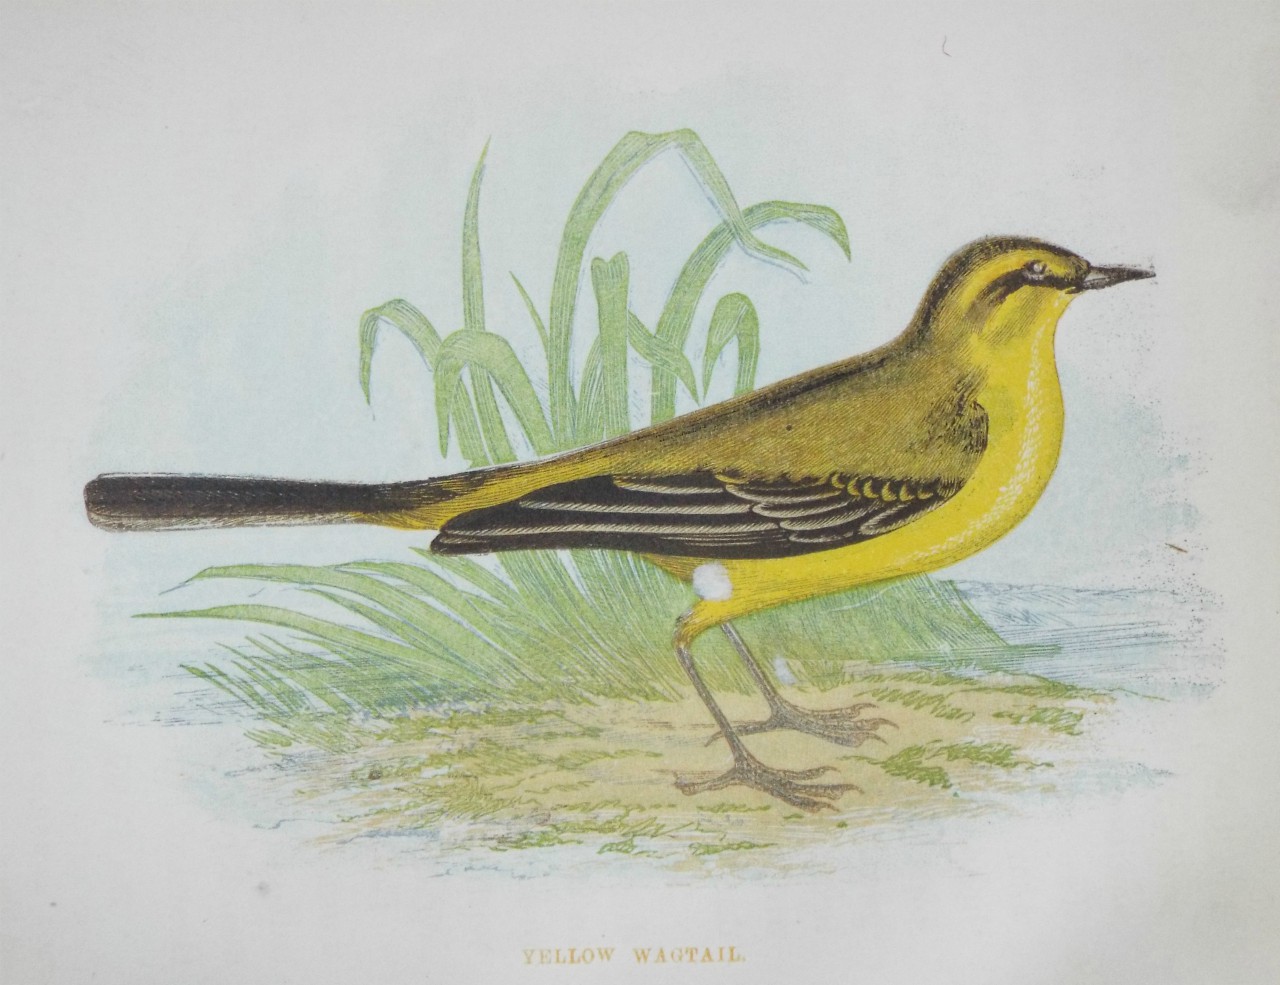 Chromo-lithograph - Yellow Wagtail.